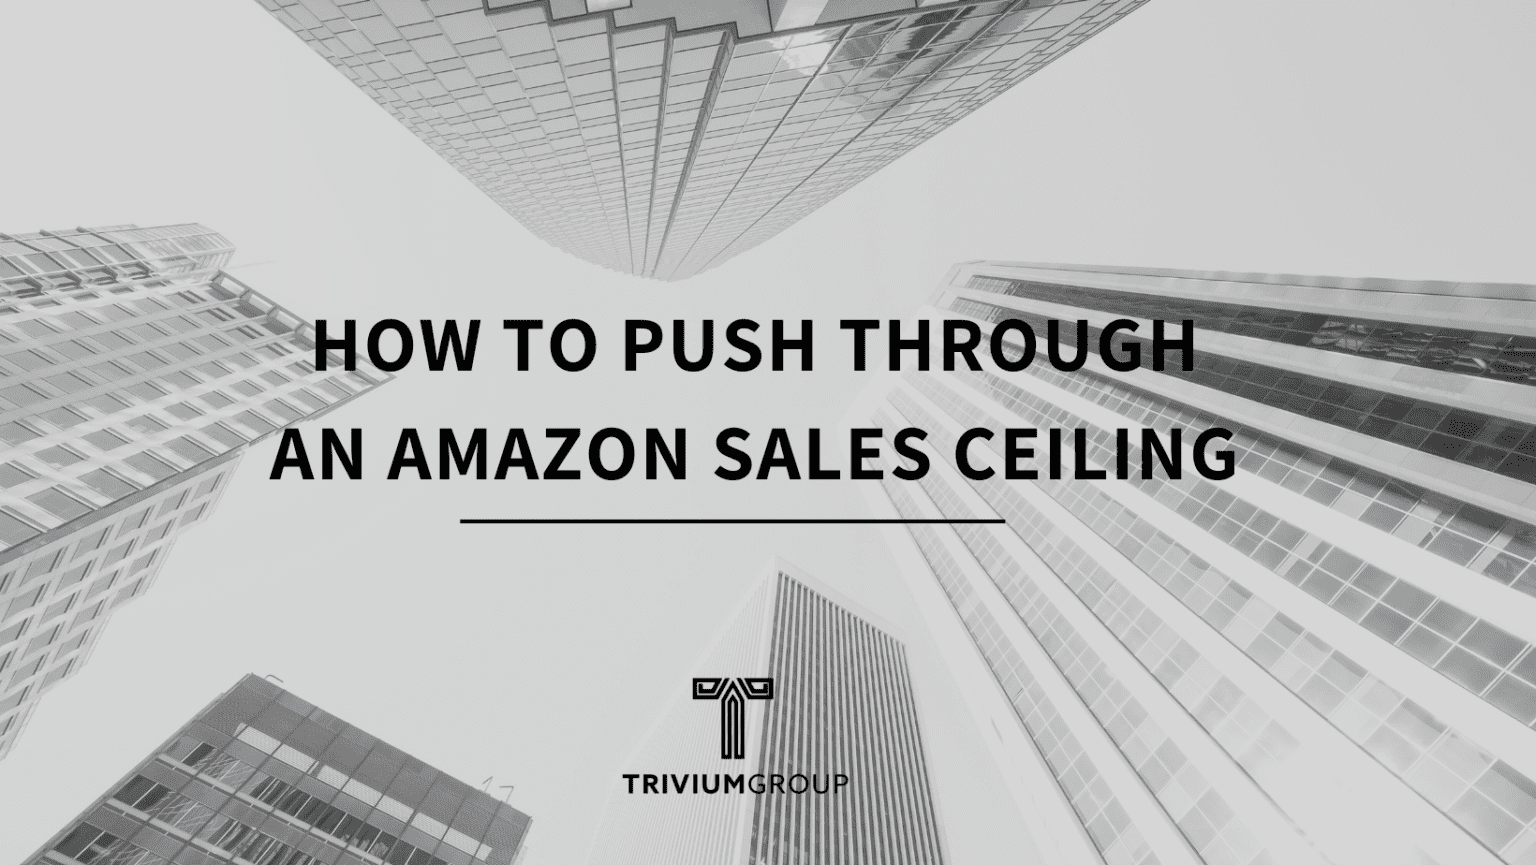 How To Push Through An Amazon Sales Ceiling